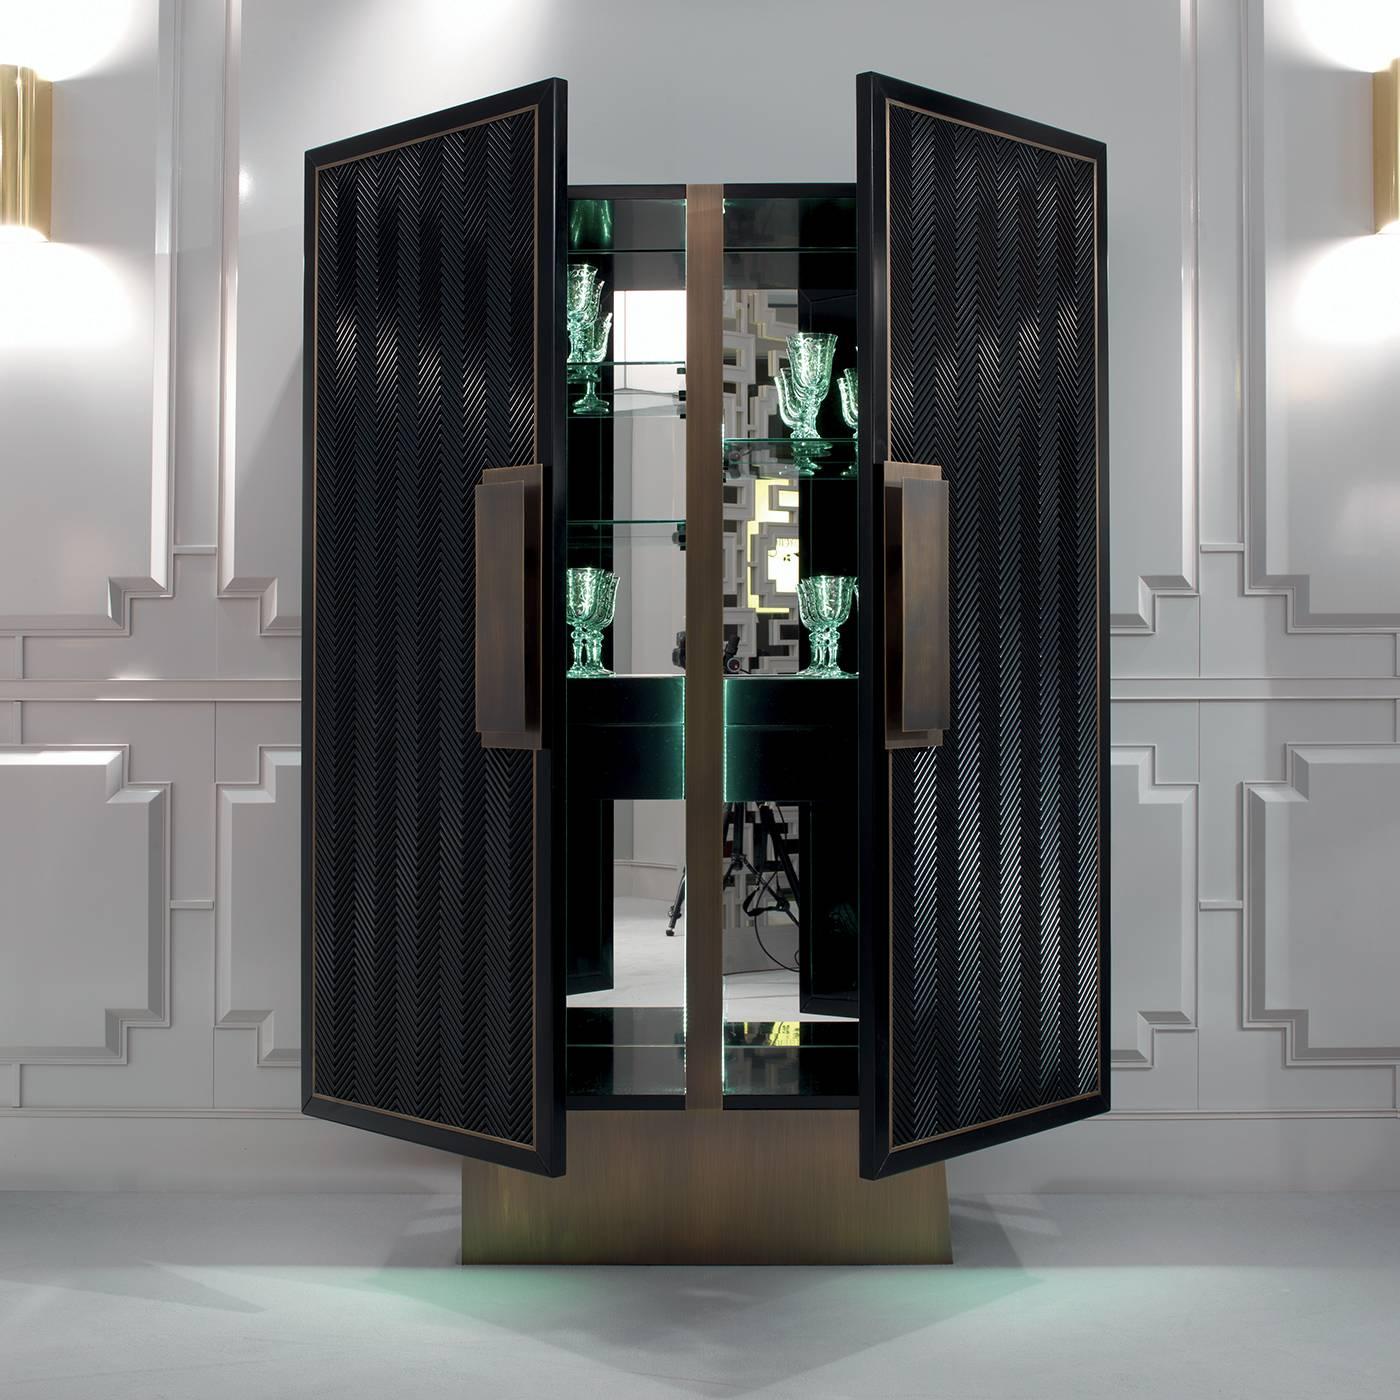 This superb bar cabinet is inspired by the geometric style and lavish charm of Art Deco and it features a thick plinth base in satin-finished brass supporting a rectangular Silhouette made in wood with a black lacquered finish. The two front doors